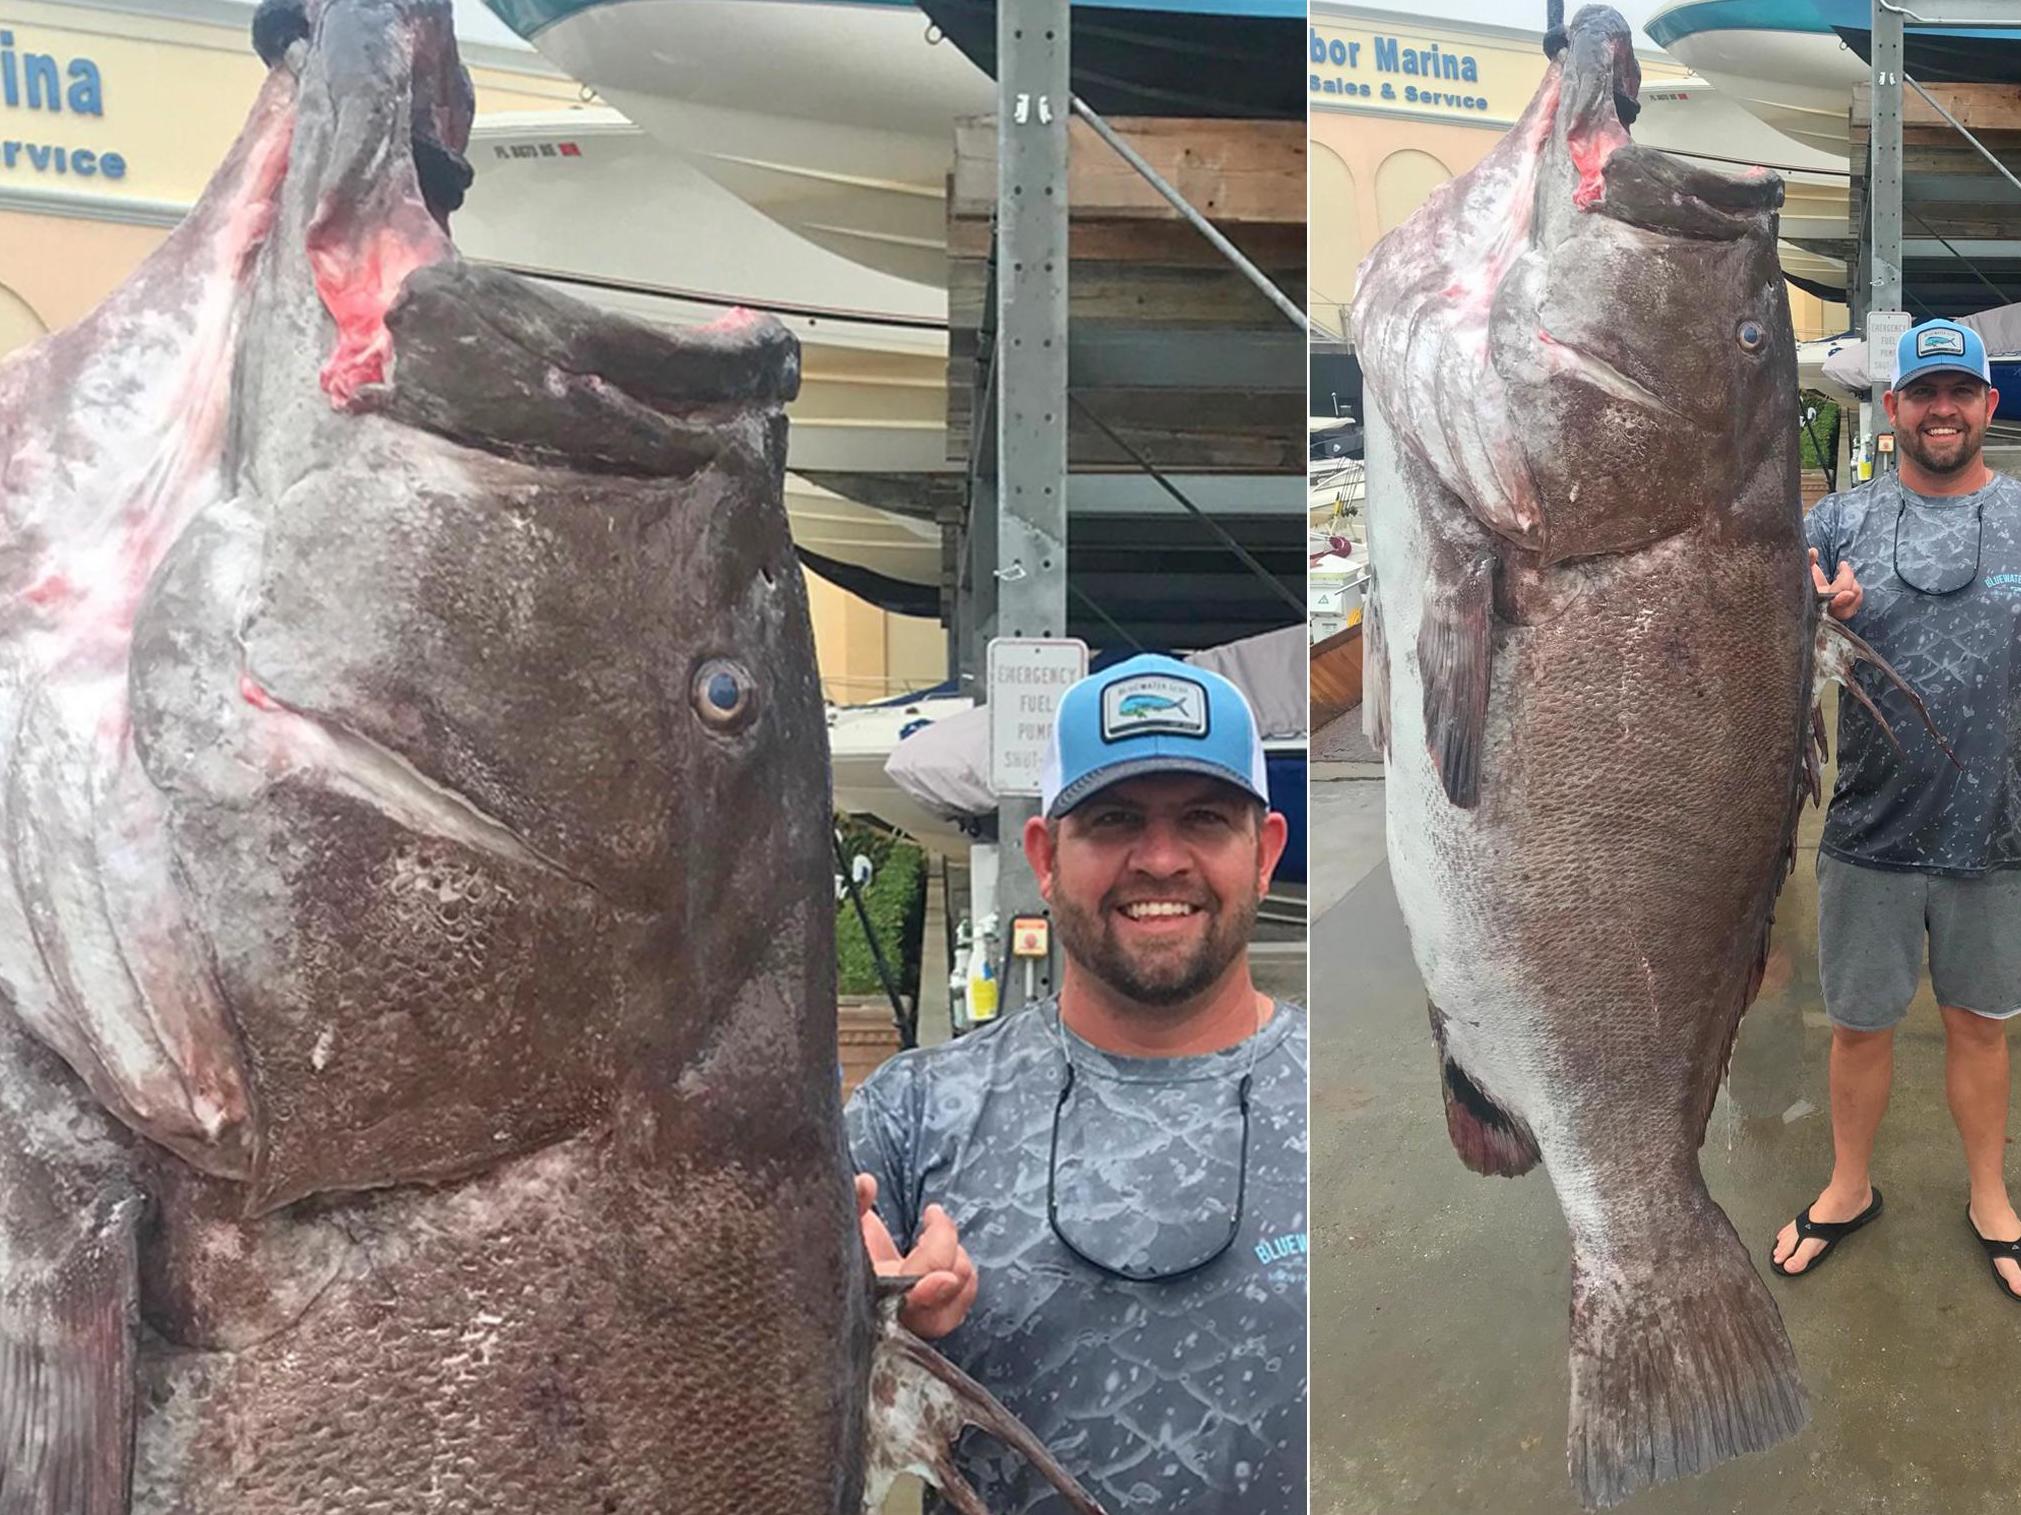 Man captures rare 50-year-old giant fish whose population is unknown